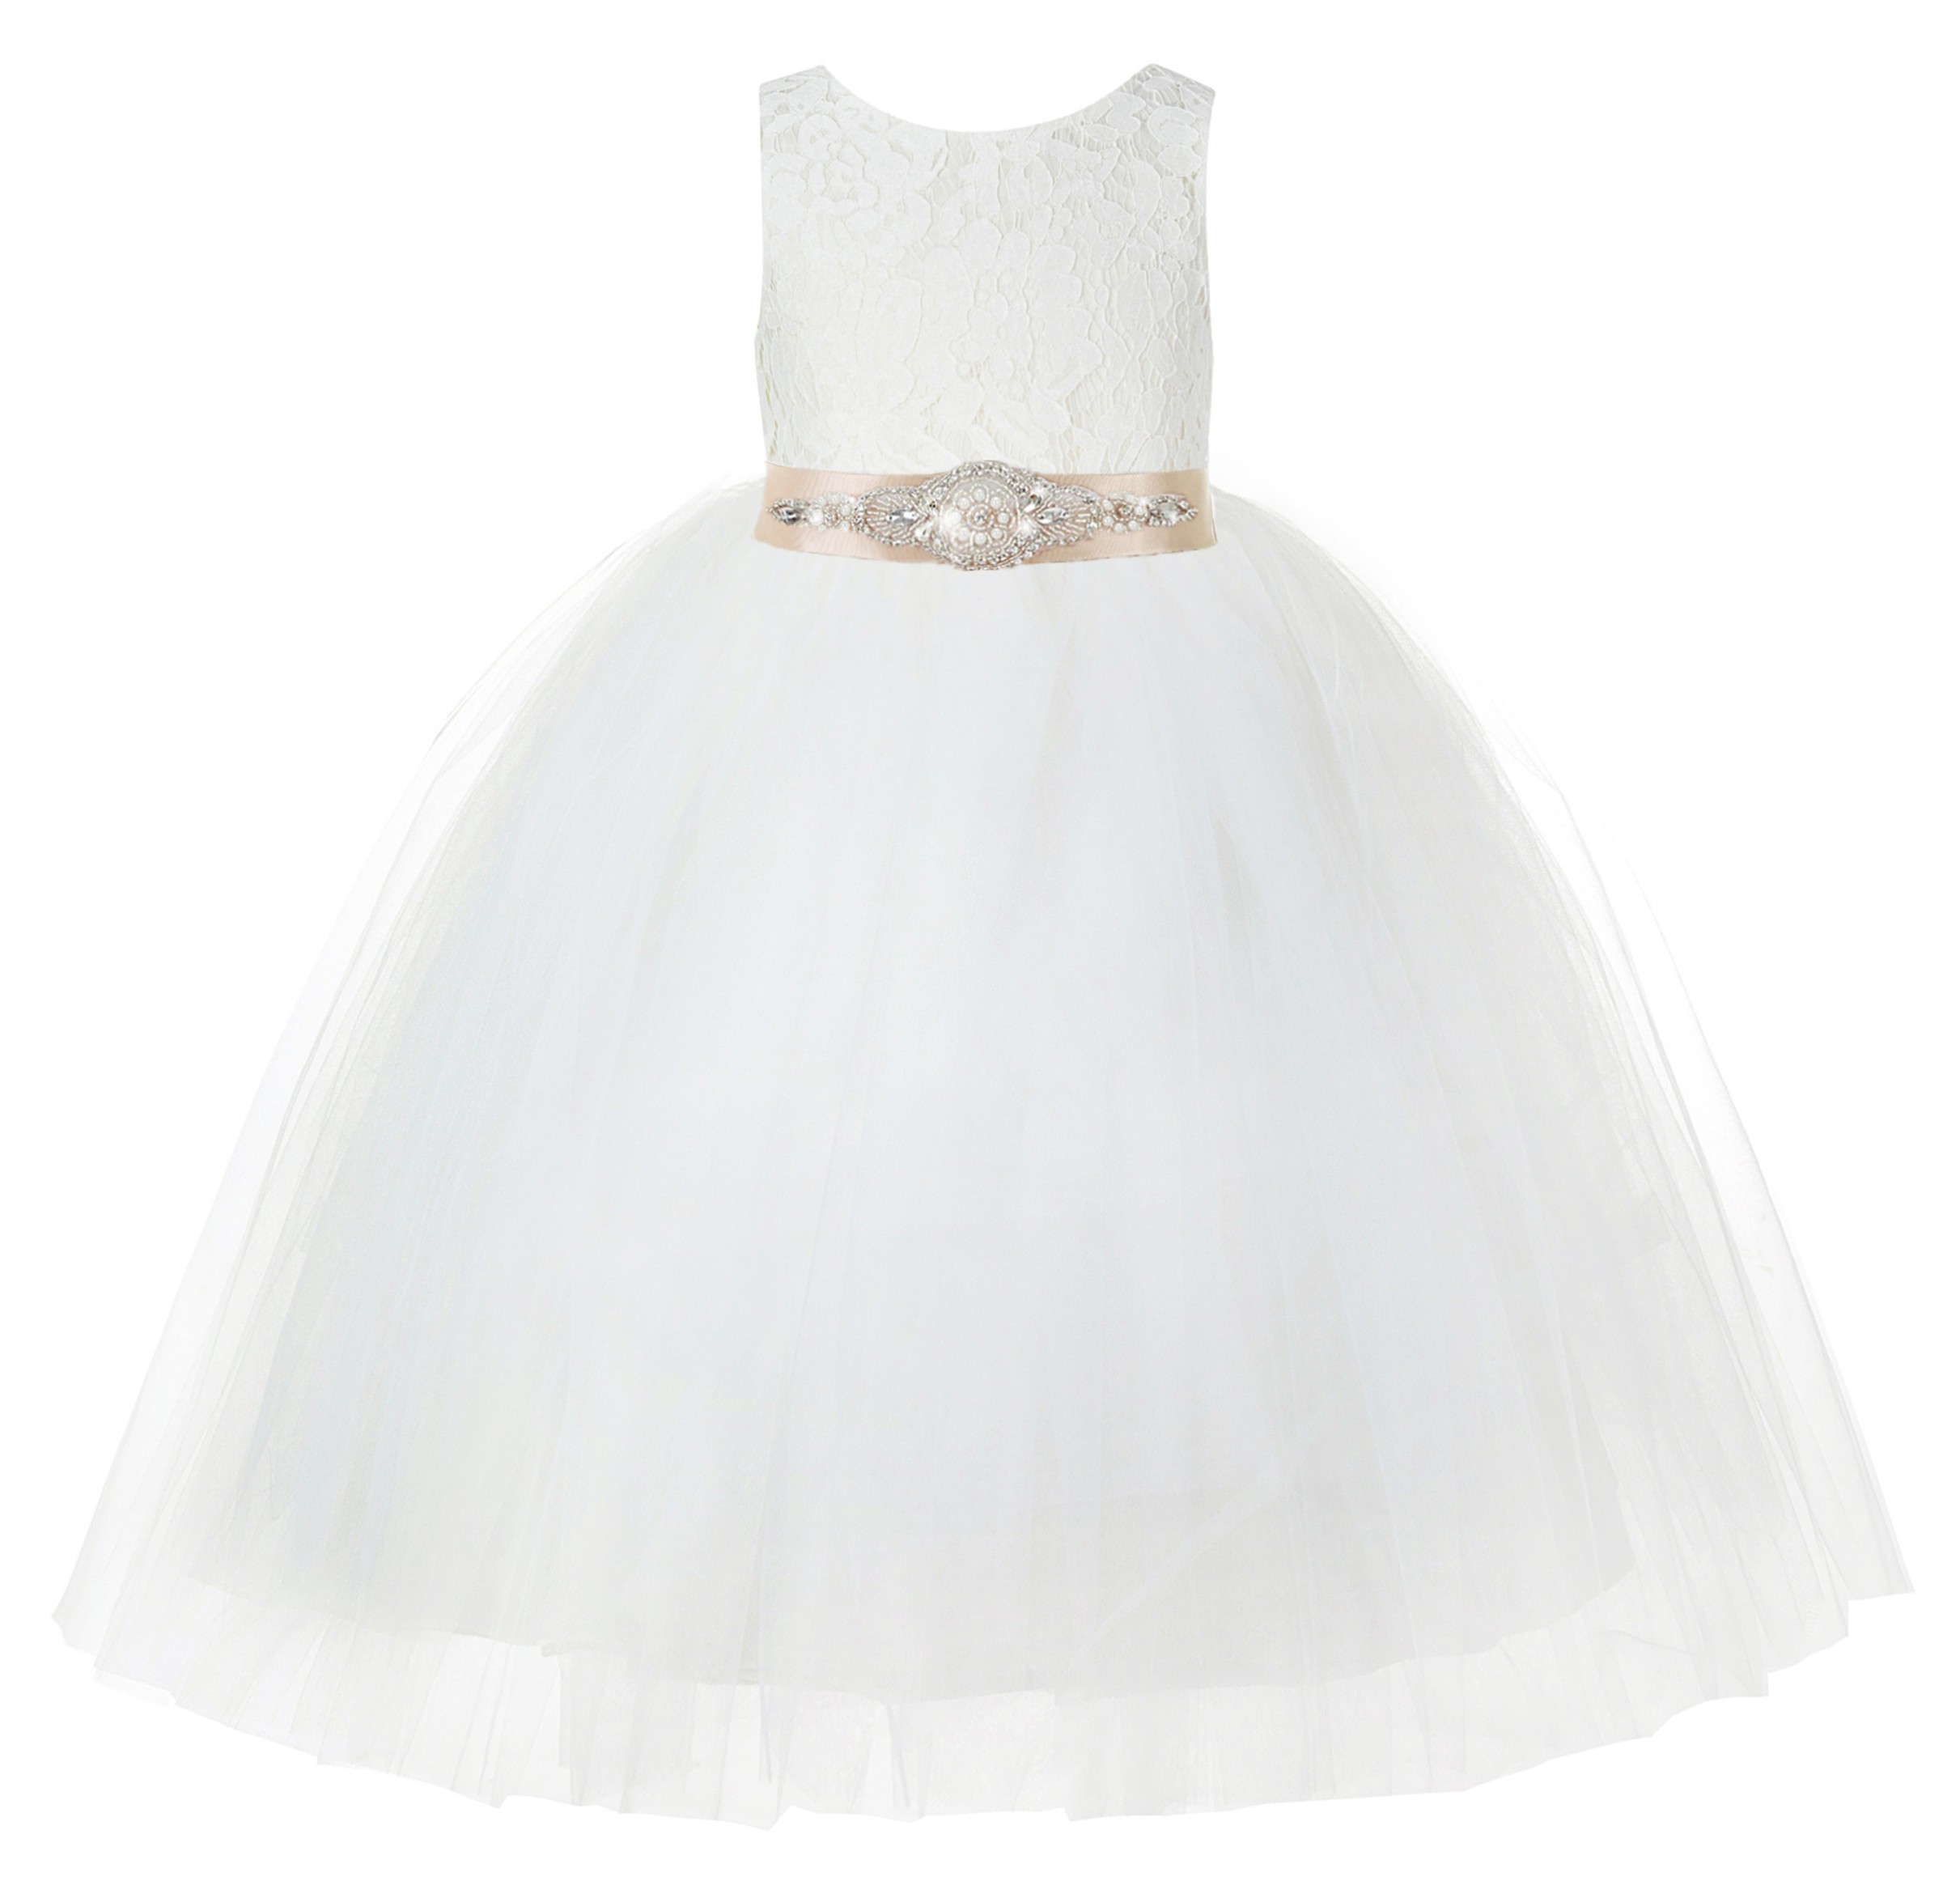 Ivory / Champagne Floral Lace Flower Girl Dress Ivory Ball Gown Lg7